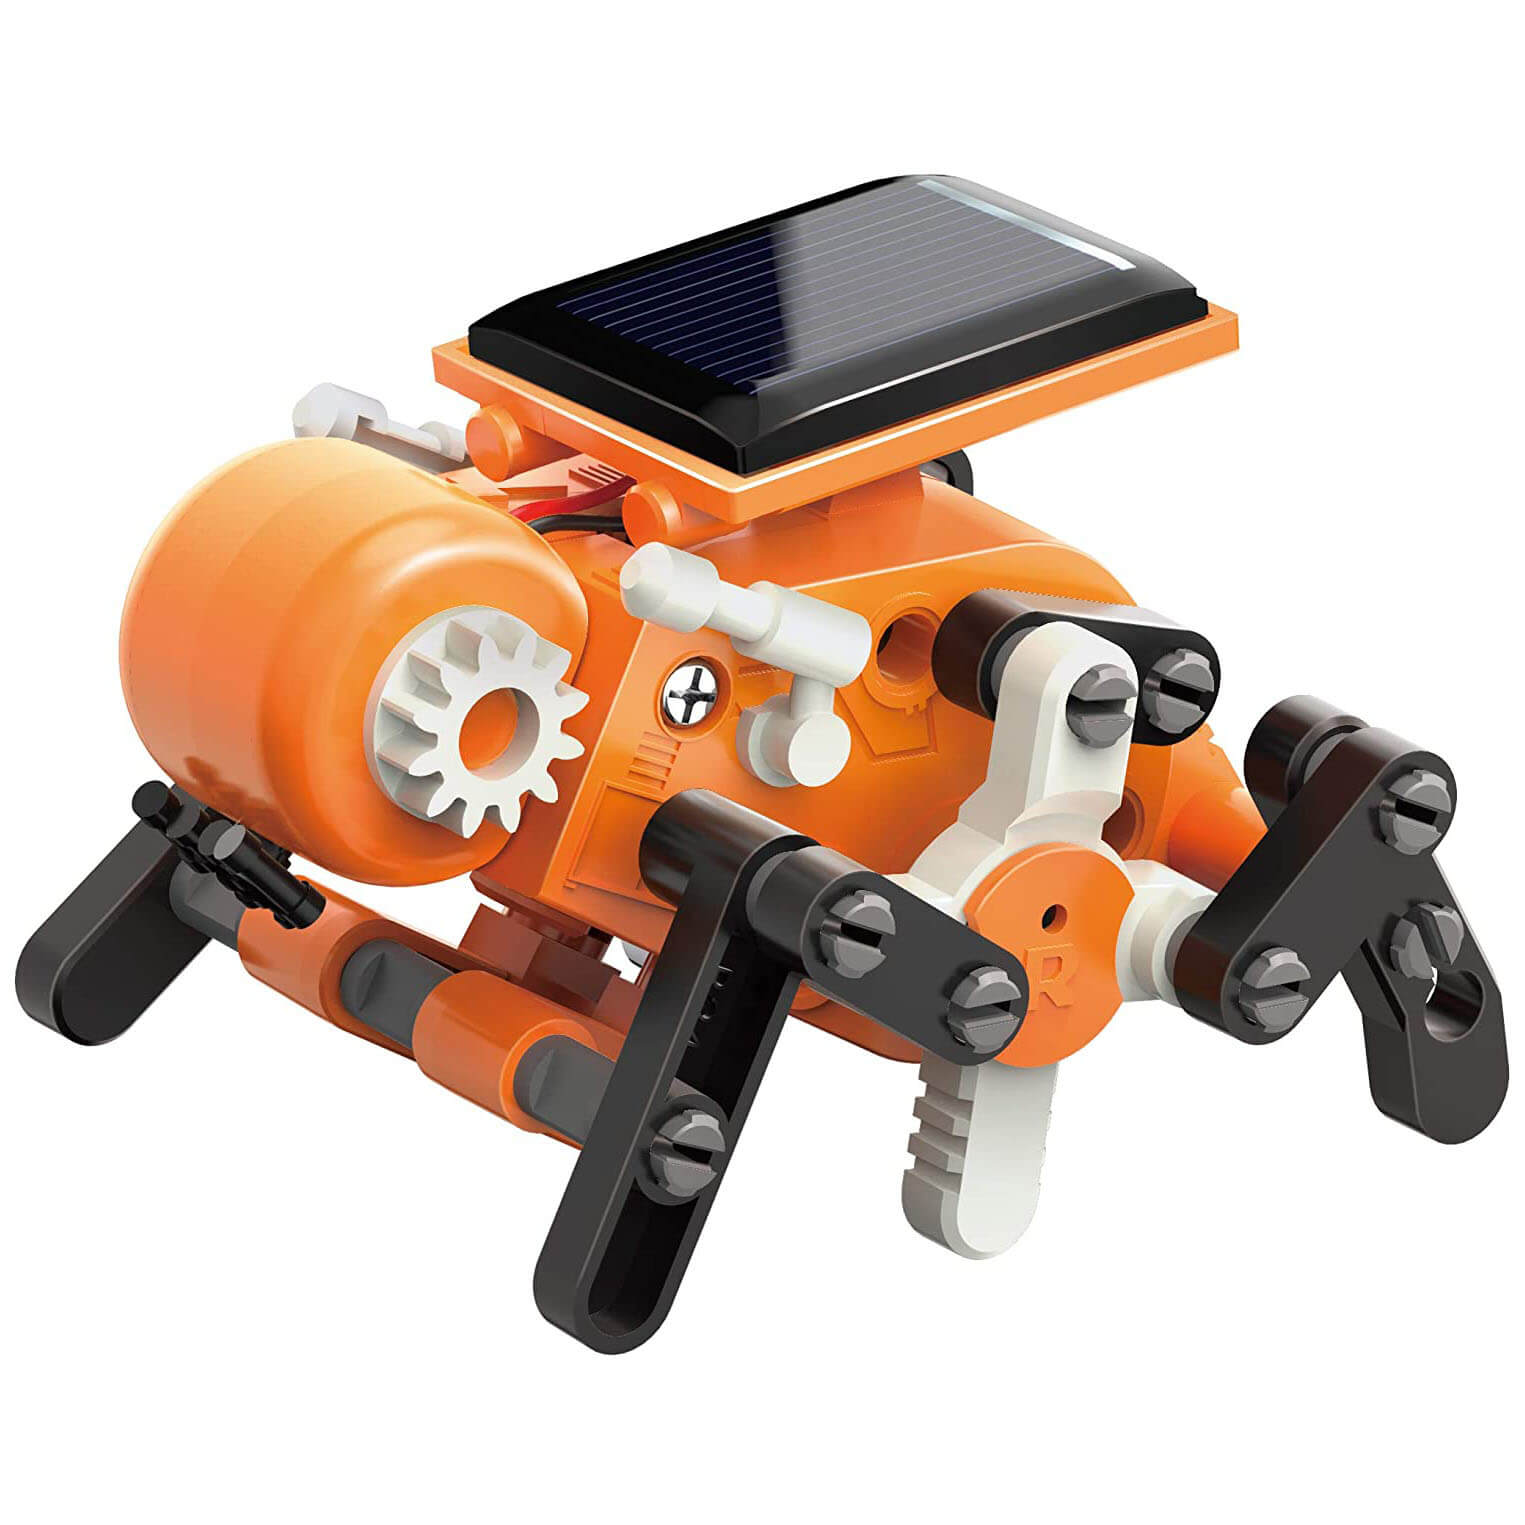 Thames and Kosmos SolarBots: 8-in-1 Solar Robot Kit